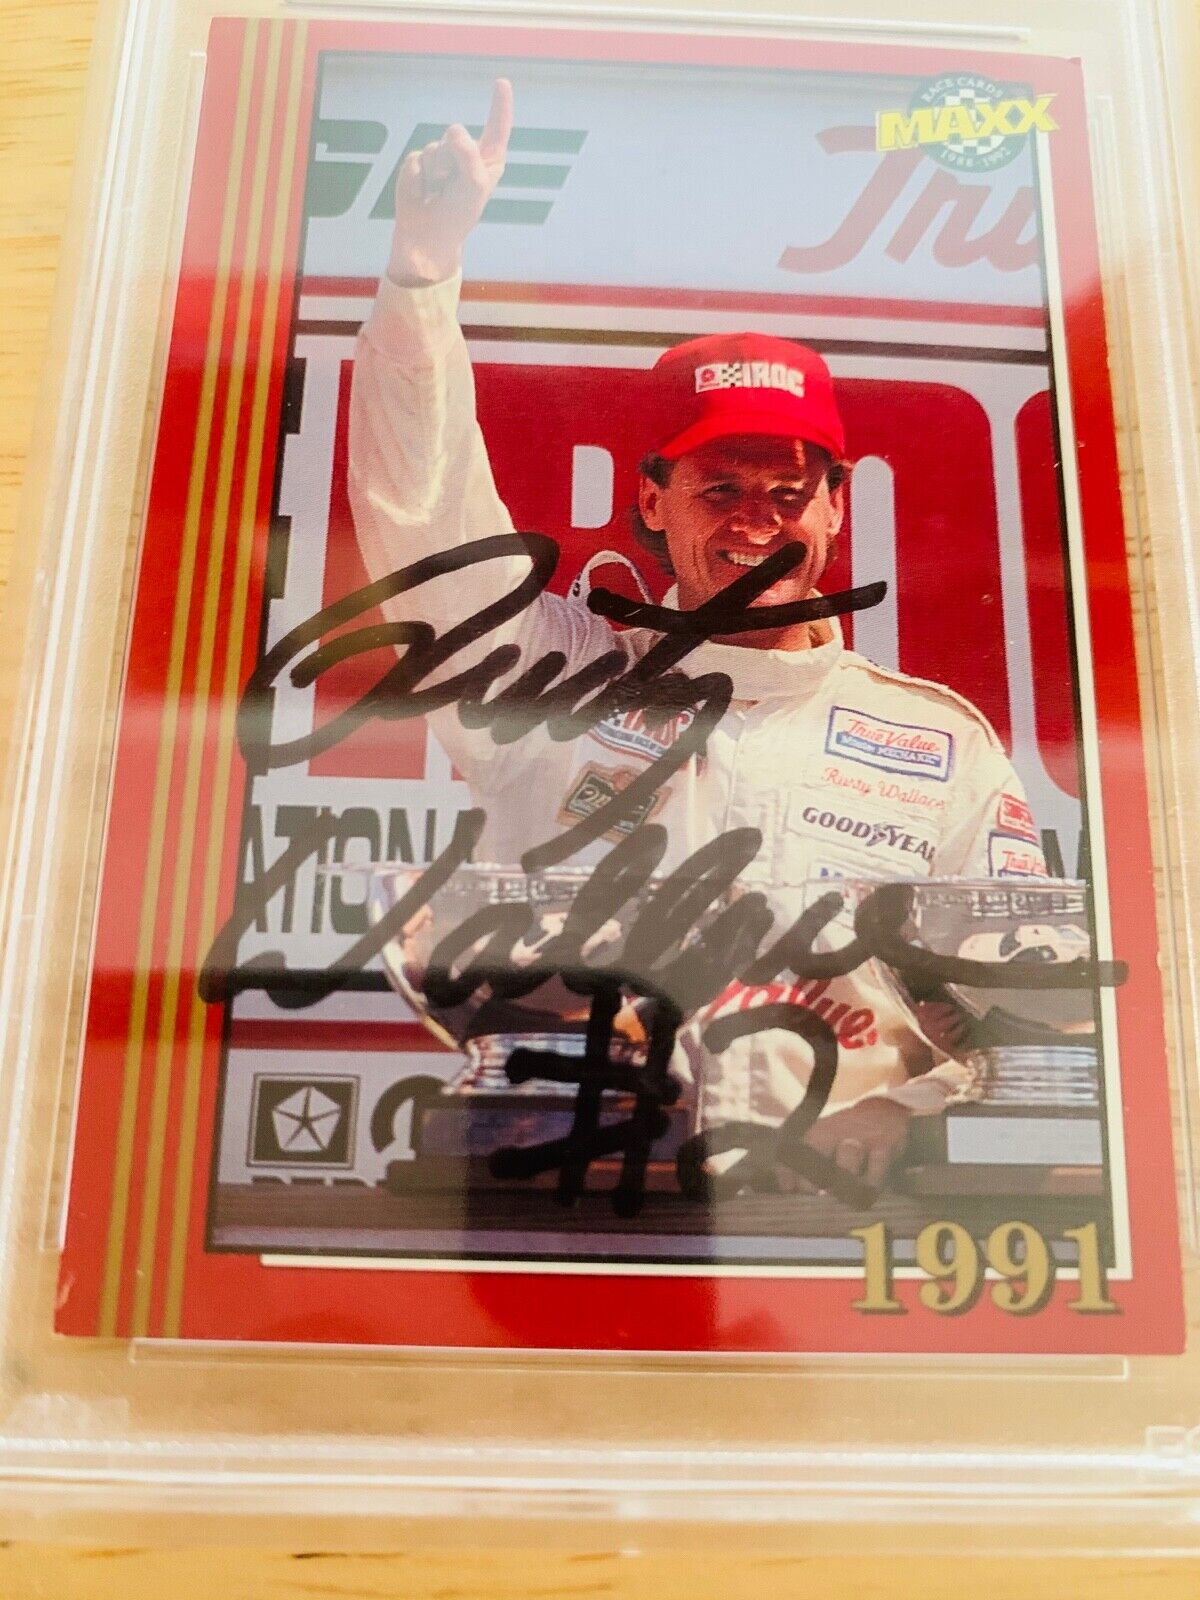 Rusty Wallace Autographed 1992 MAXX Auto Racing Card PSA Certified Slabbed